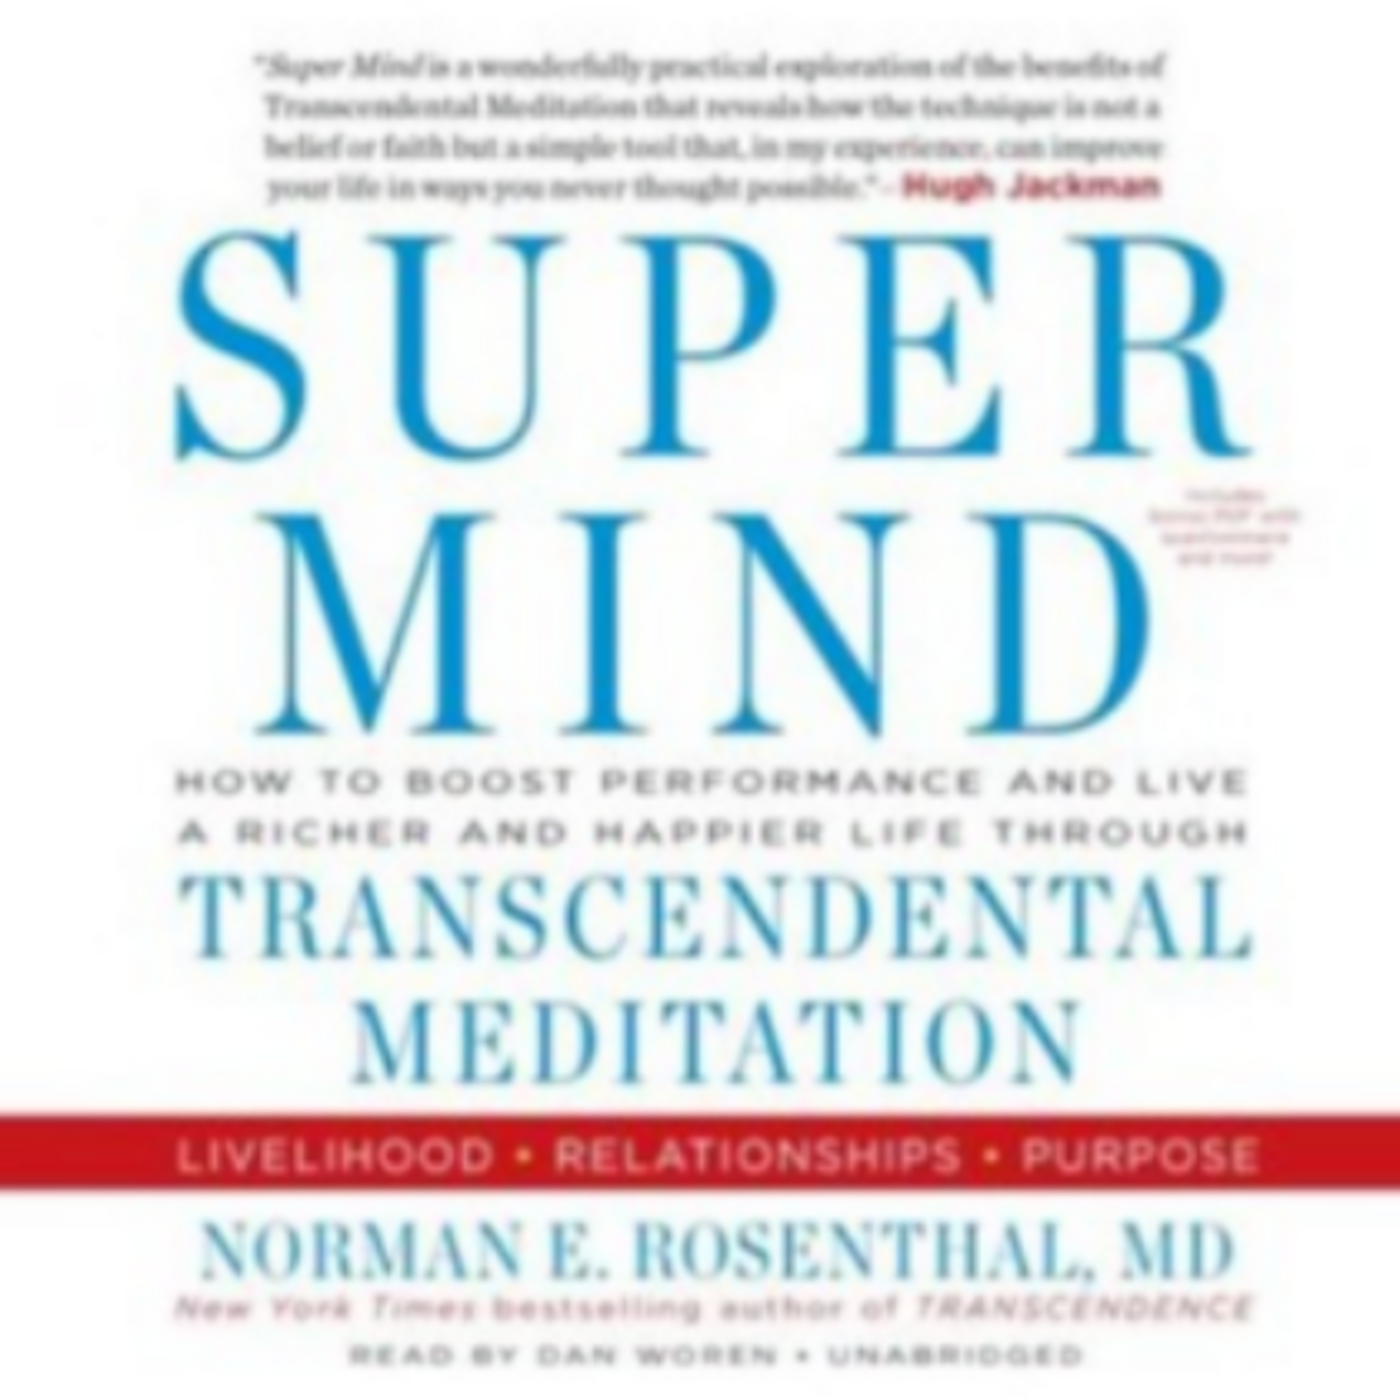 Episode 2469: Dr. Norman E. Rosenthal MD  ~ WSJ,  NY Times Author 